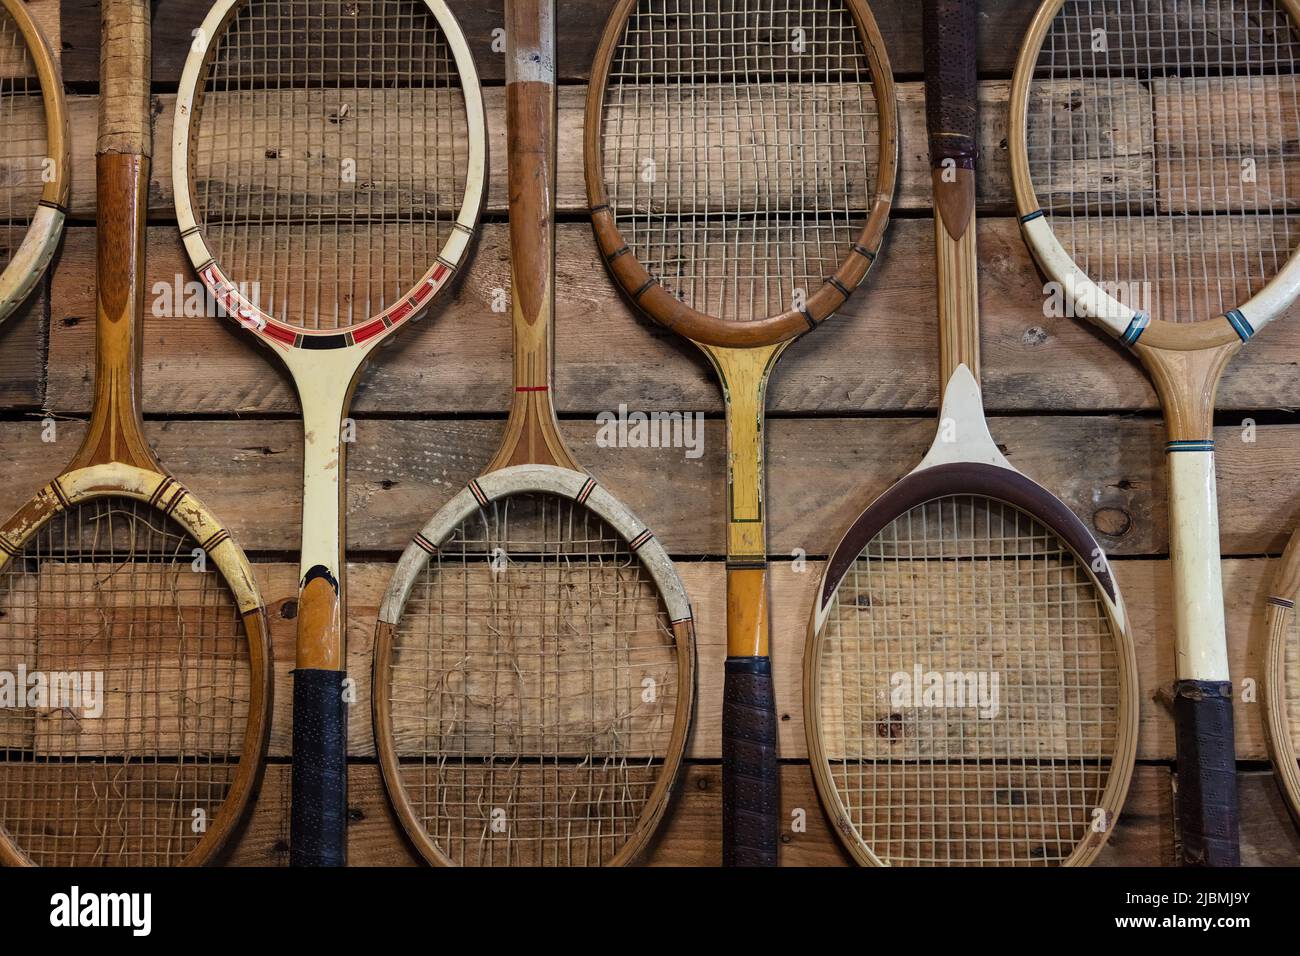 Old Fashioned Vintage and Broken Wooden Tennis Rackets or Racquets Stock Photo